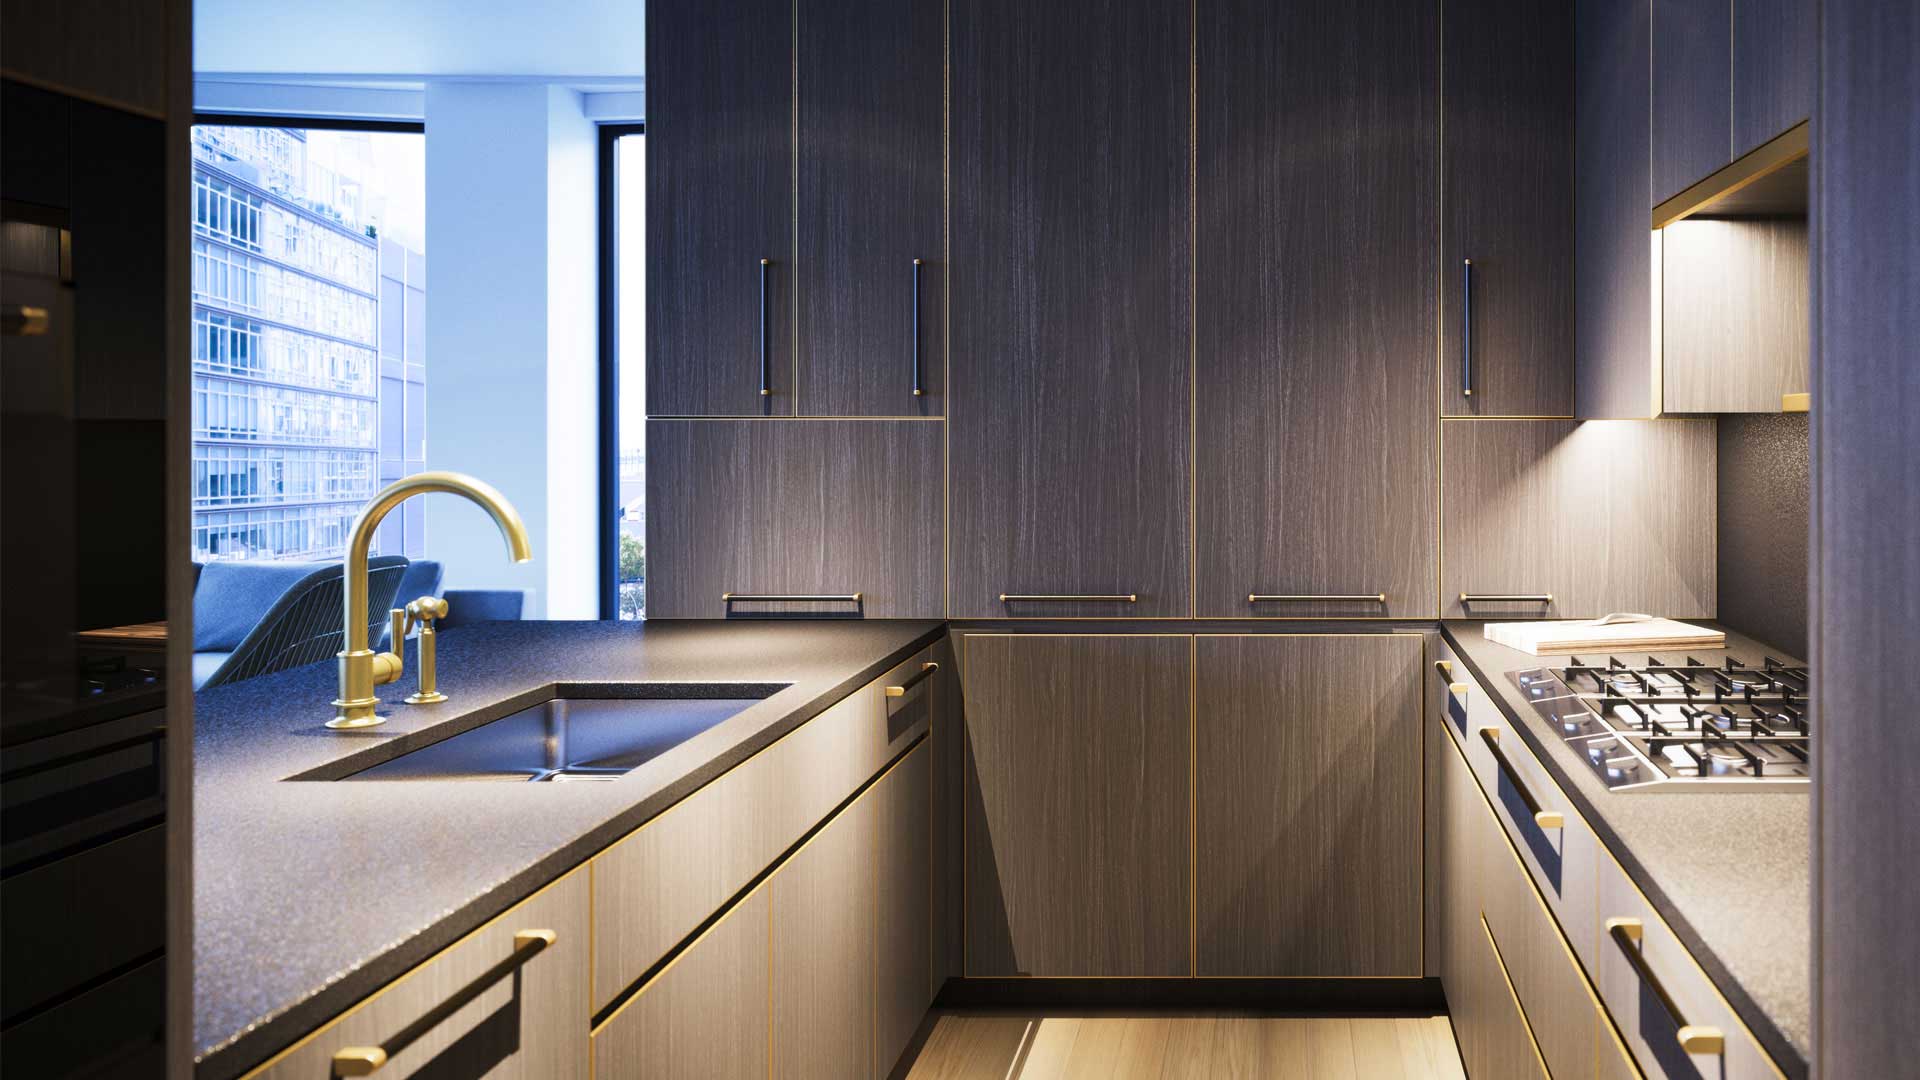 505 West 19 Cabinets By Dbs 02 Dbs Cabinets